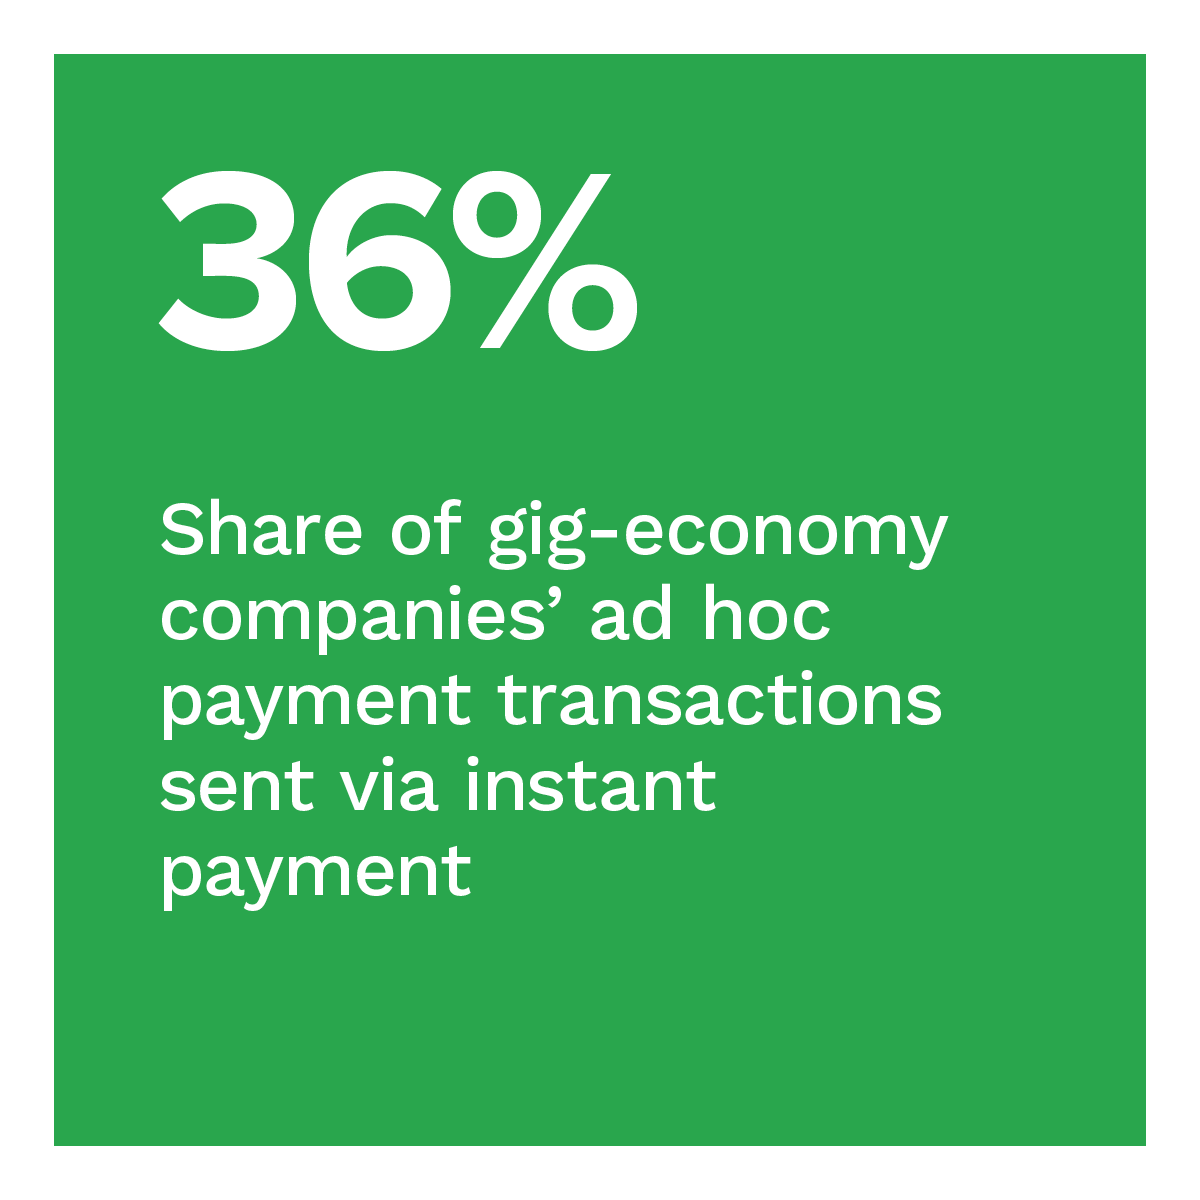 36%: Share of gig economy companies’ ad hoc payment transactions sent via instant payment